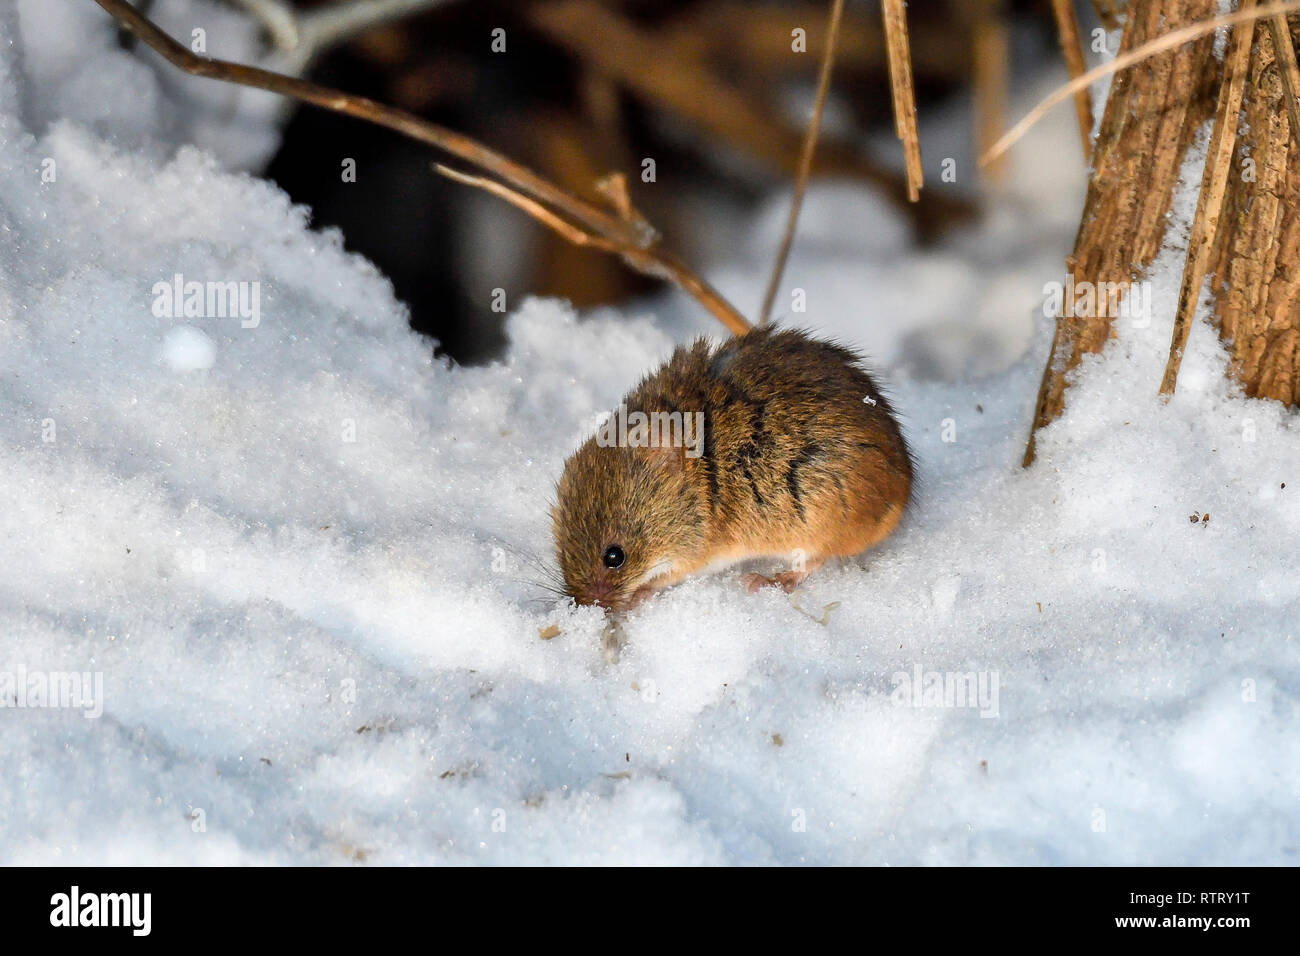 Field vole is digging out seeds from the snow. Stock Photo